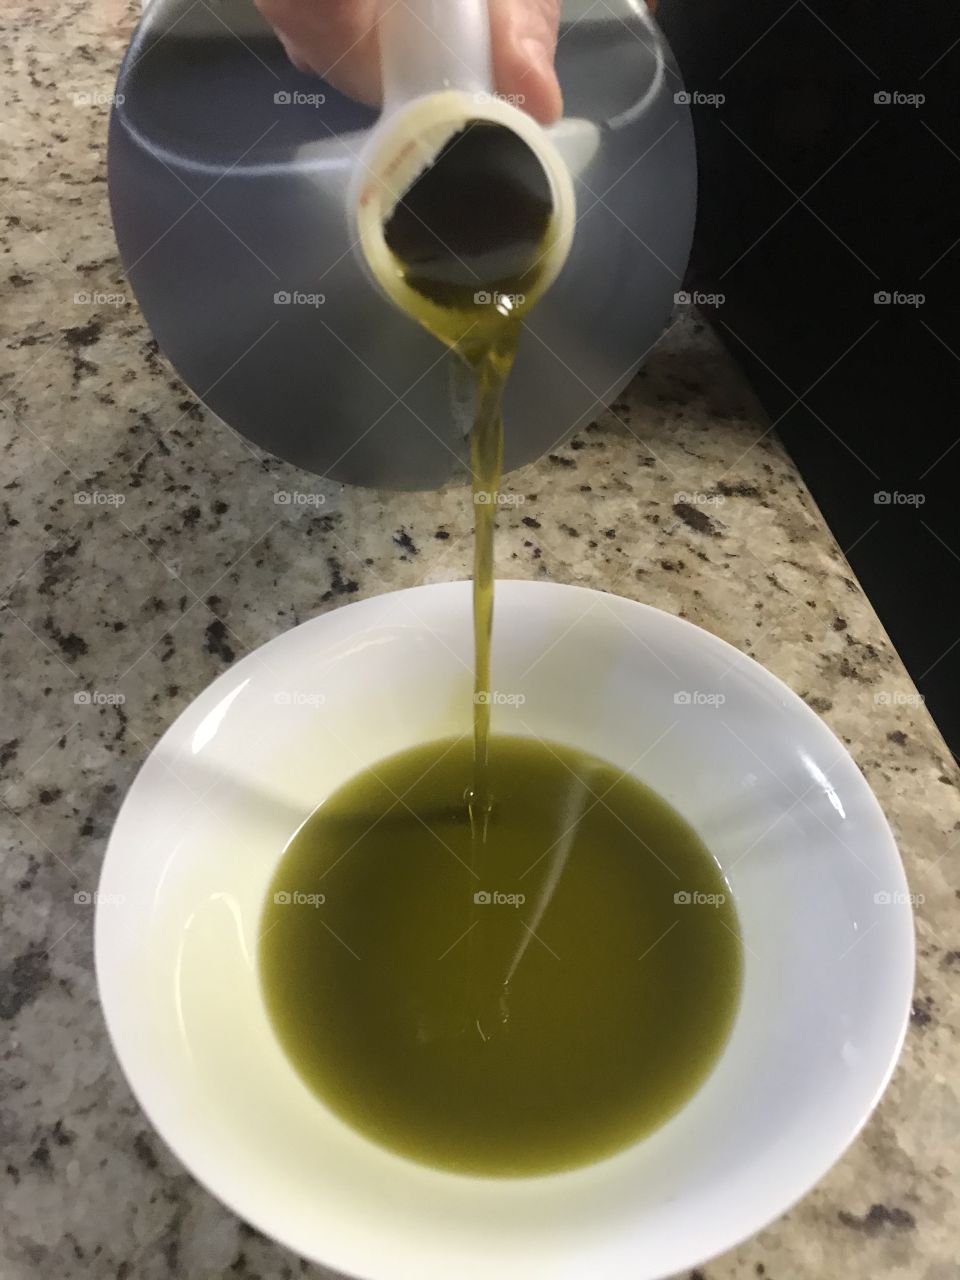 Pure GOLD  💯 % EXTRA VIRGIN OLIVE OIL HAND PICKED  and taken to the mill to be Pressed it’s an amazing step by step process !  